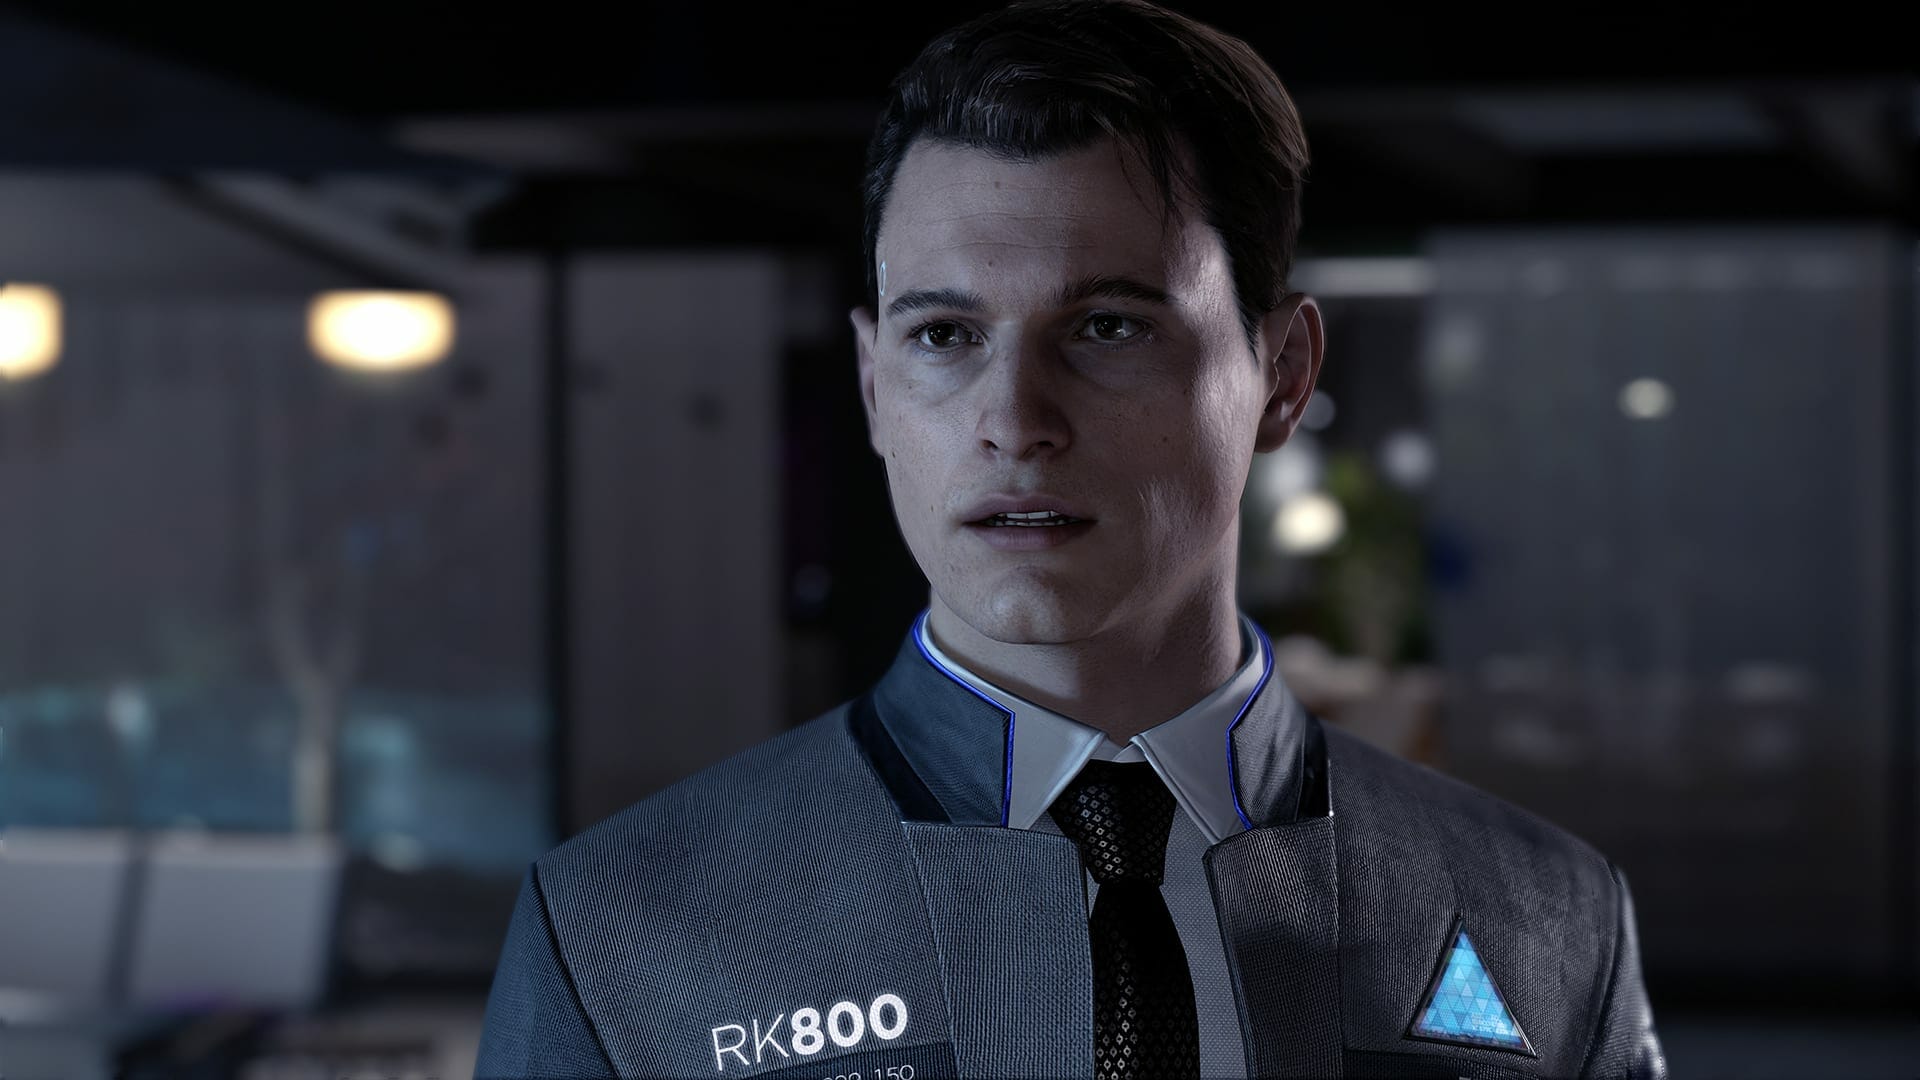 Connor-in-Detroit-Become-Human.jpg